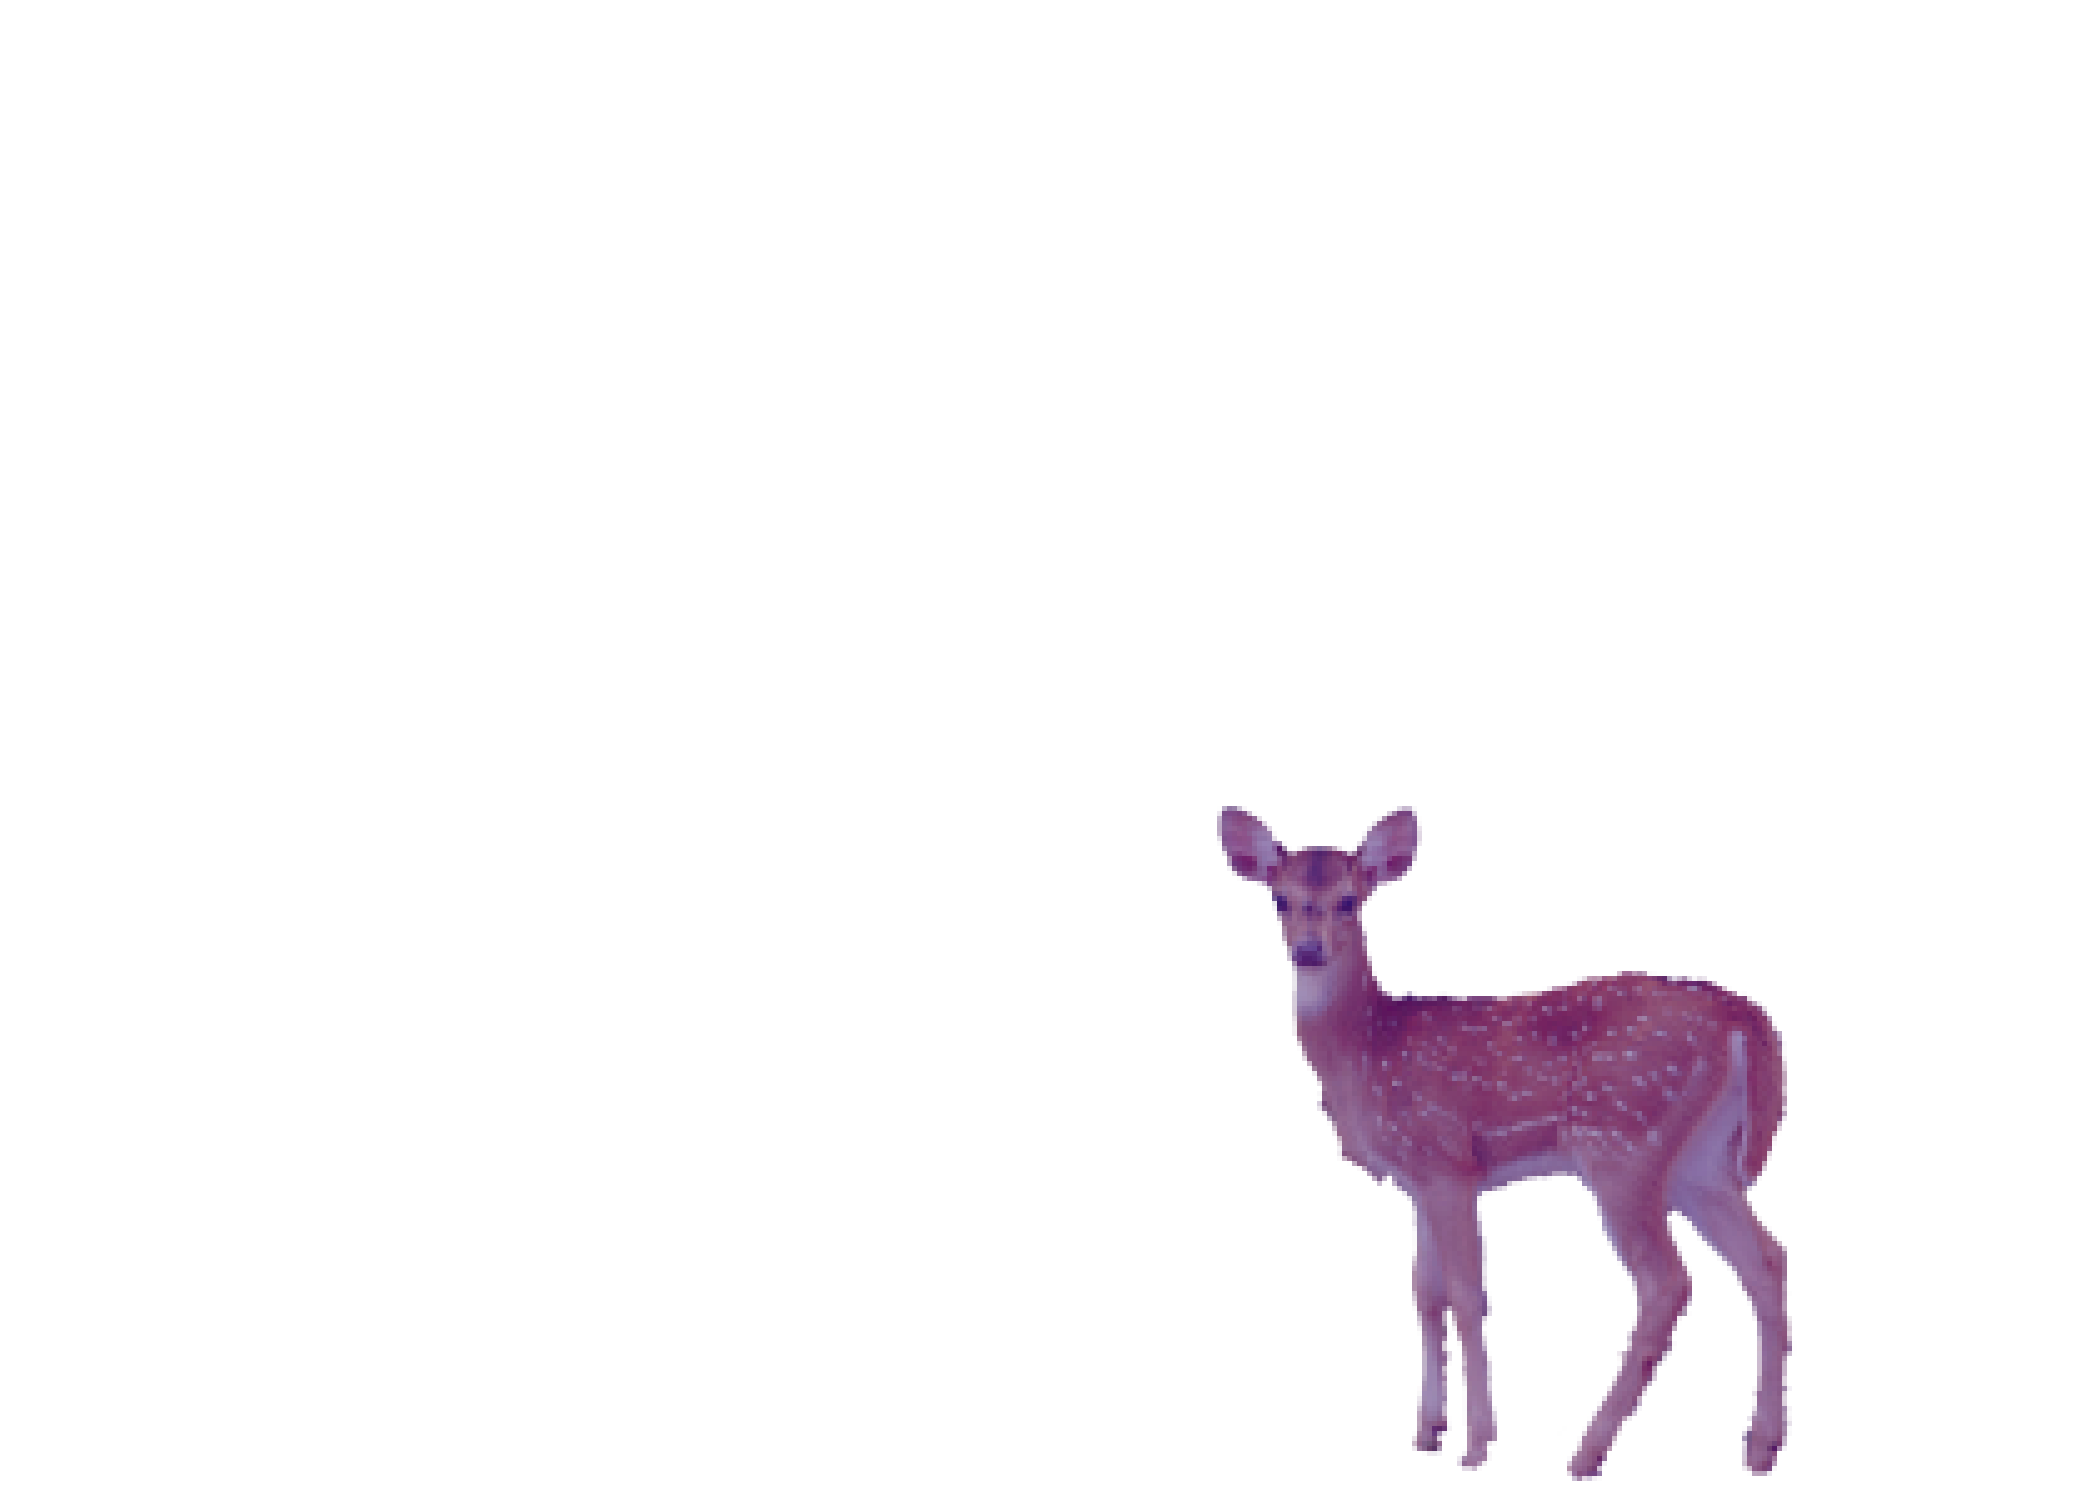 A singular pink deer, emergent from the photograph, hestitates at its border. It watches you as its brothers do.